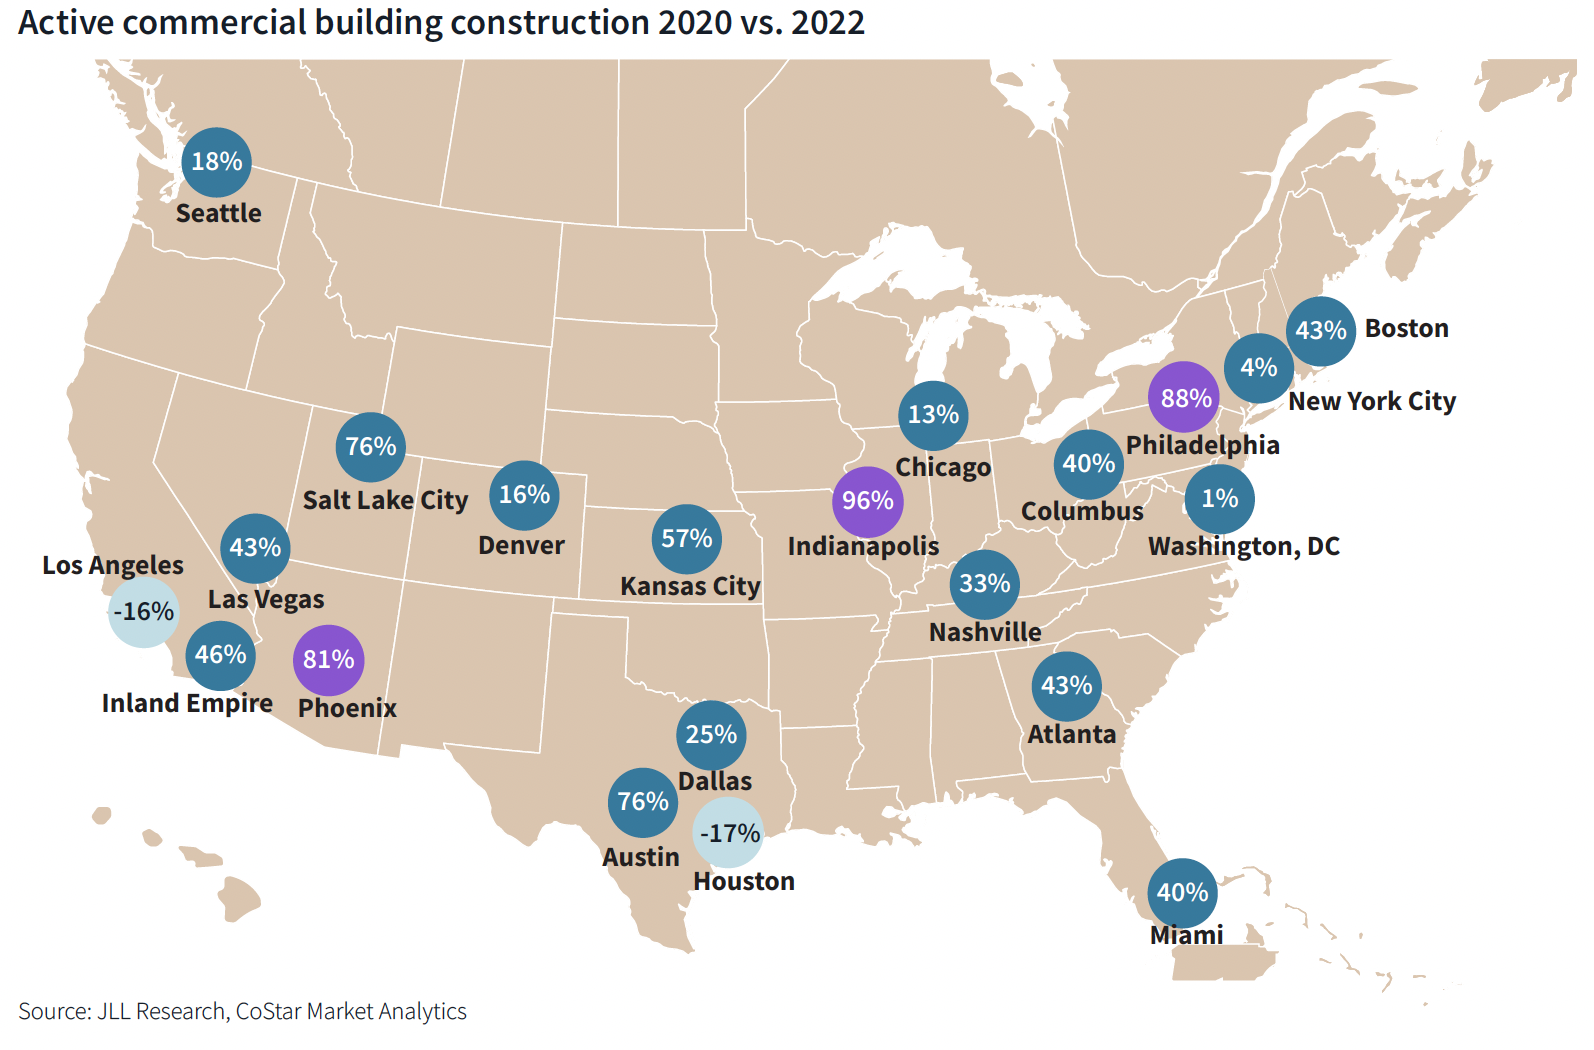 Several markets reported big chains in construction activity